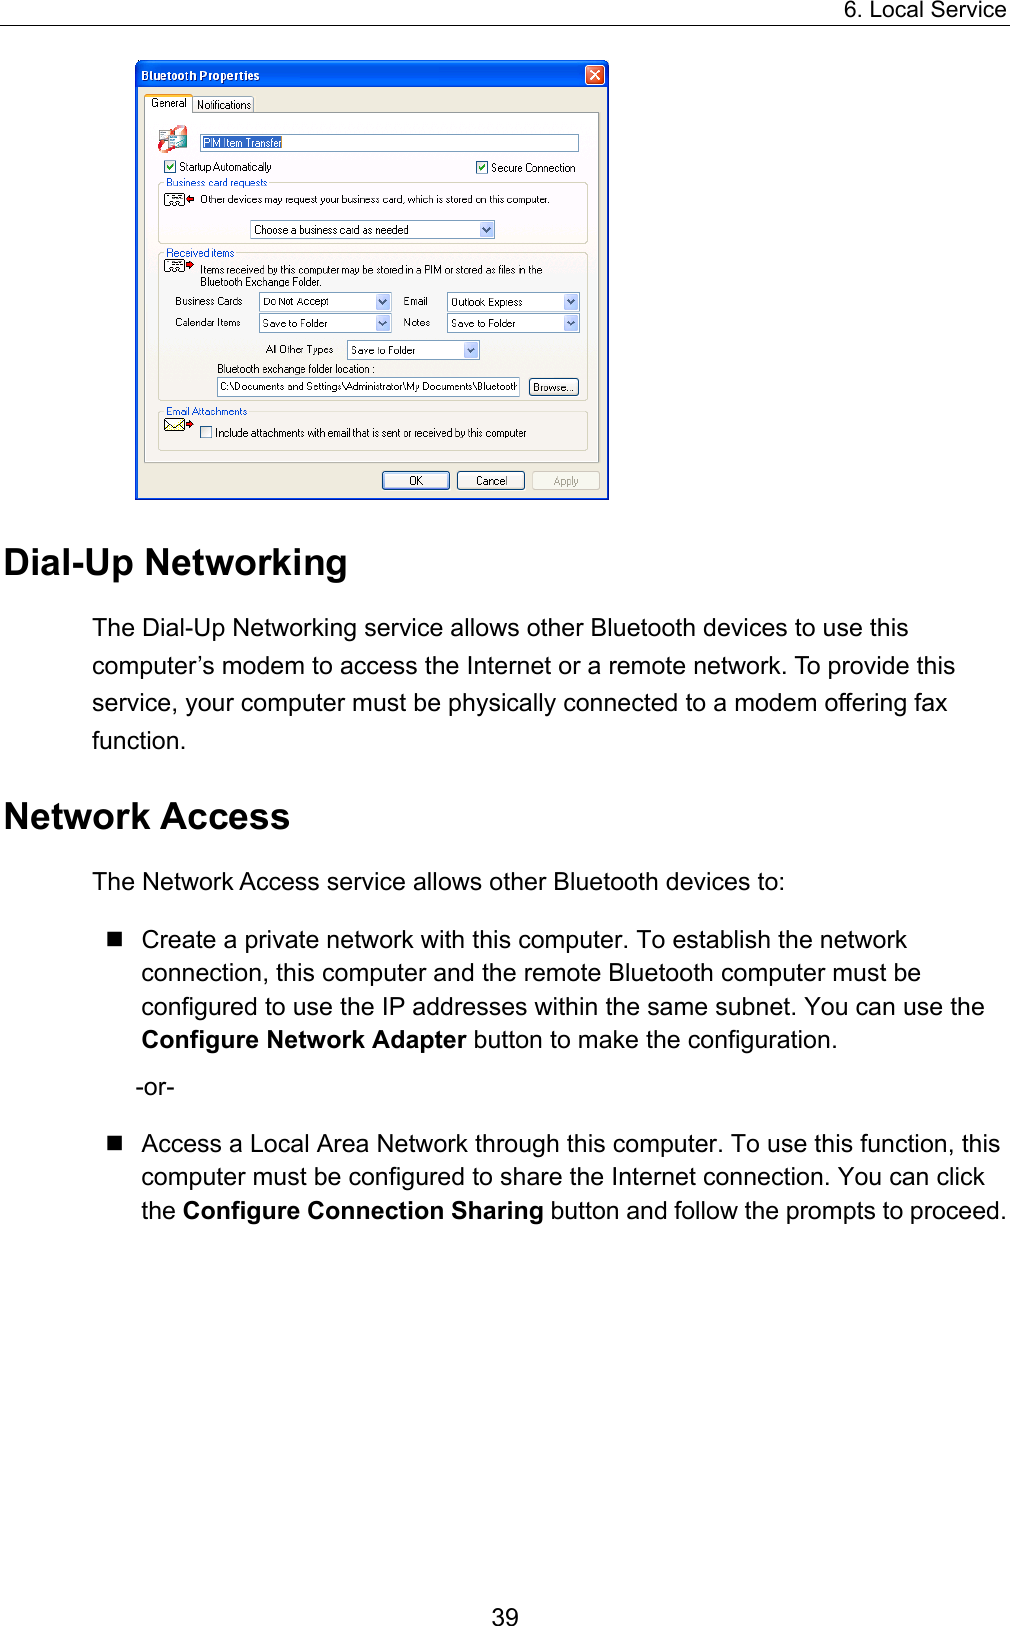 6. Local Service 39  Dial-Up Networking The Dial-Up Networking service allows other Bluetooth devices to use this computer’s modem to access the Internet or a remote network. To provide this service, your computer must be physically connected to a modem offering fax function. Network Access The Network Access service allows other Bluetooth devices to:  Create a private network with this computer. To establish the network connection, this computer and the remote Bluetooth computer must be configured to use the IP addresses within the same subnet. You can use the Configure Network Adapter button to make the configuration.   -or-  Access a Local Area Network through this computer. To use this function, this computer must be configured to share the Internet connection. You can click the Configure Connection Sharing button and follow the prompts to proceed.   